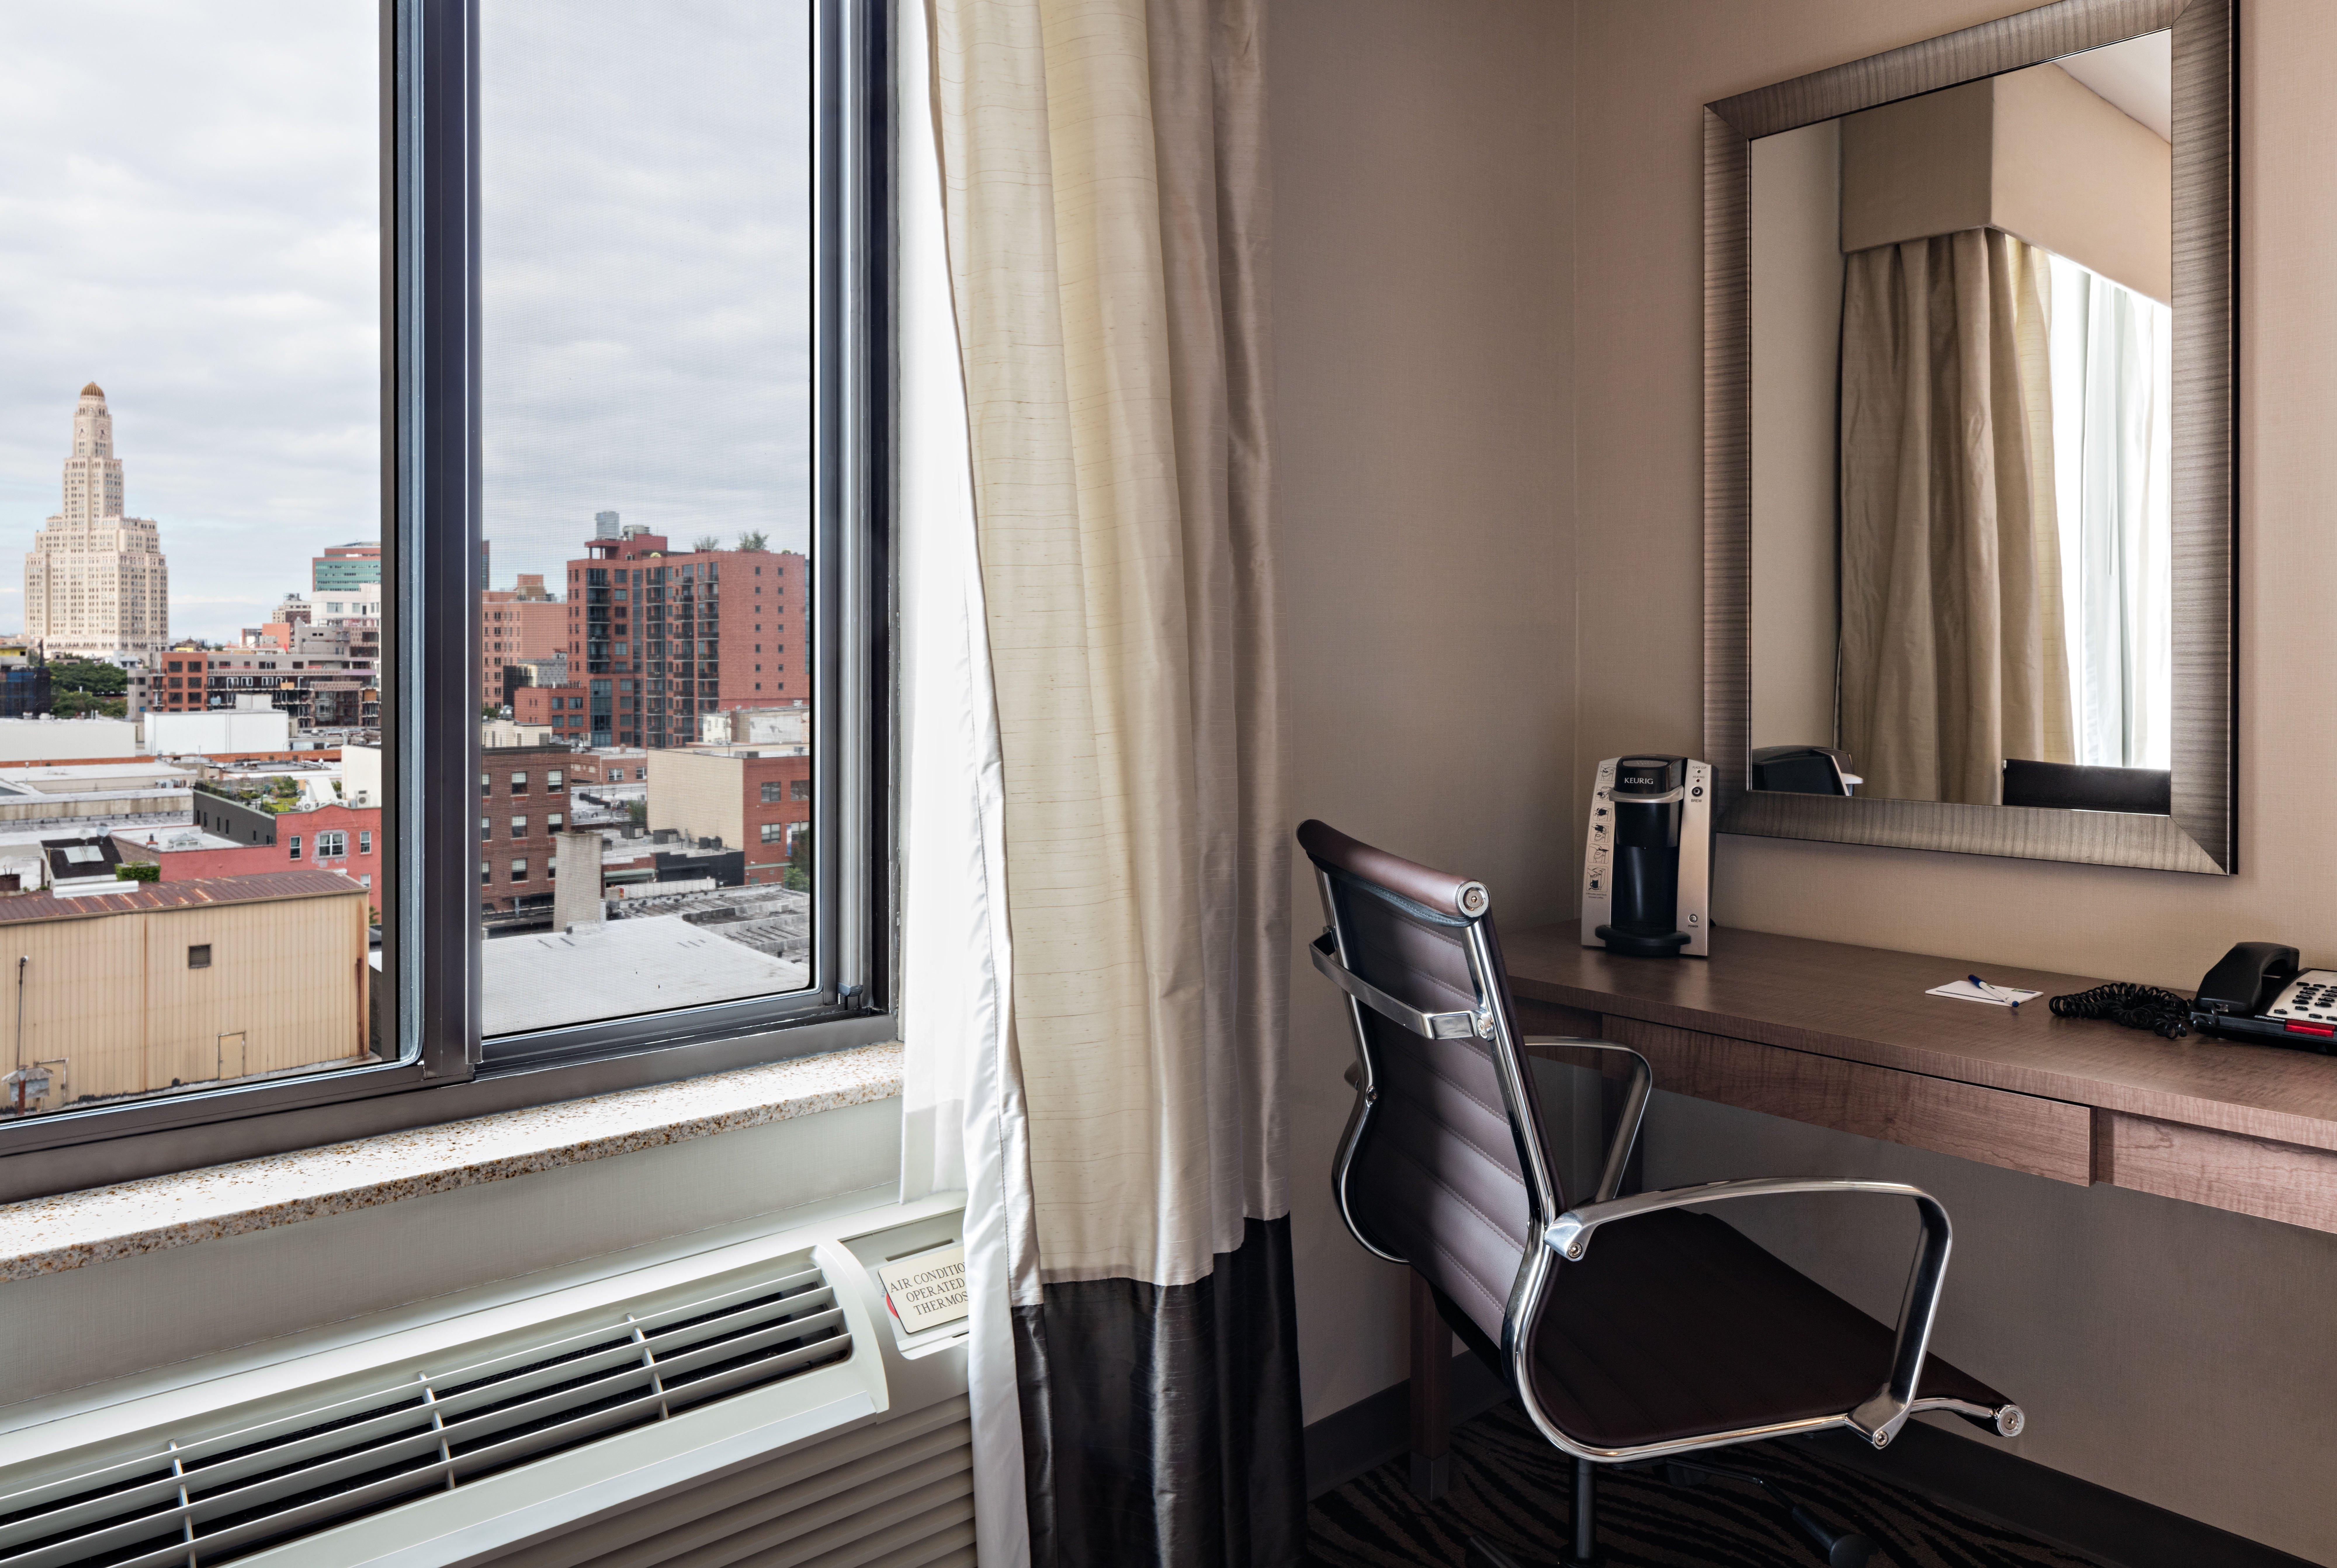 HOLIDAY INN EXPRESS BROOKLYN NEW YORK, NY 3* (United States) - from US$ 168  | BOOKED